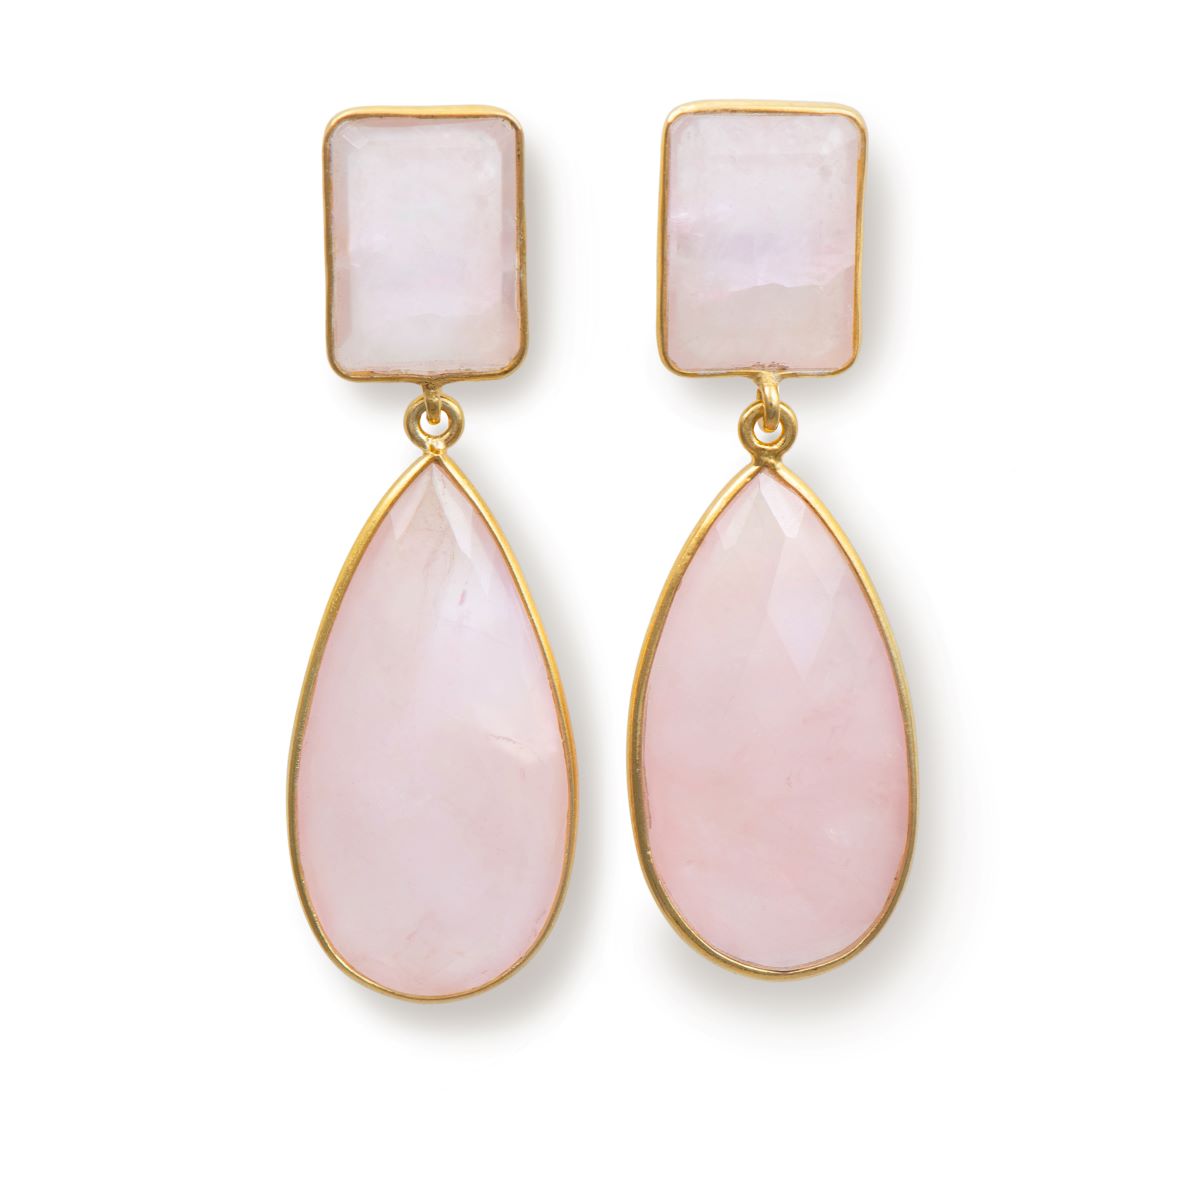 Long Statement Earrings with a Rectangle Stone and Long Pear Shaped Stone Drop - Rose Quartz